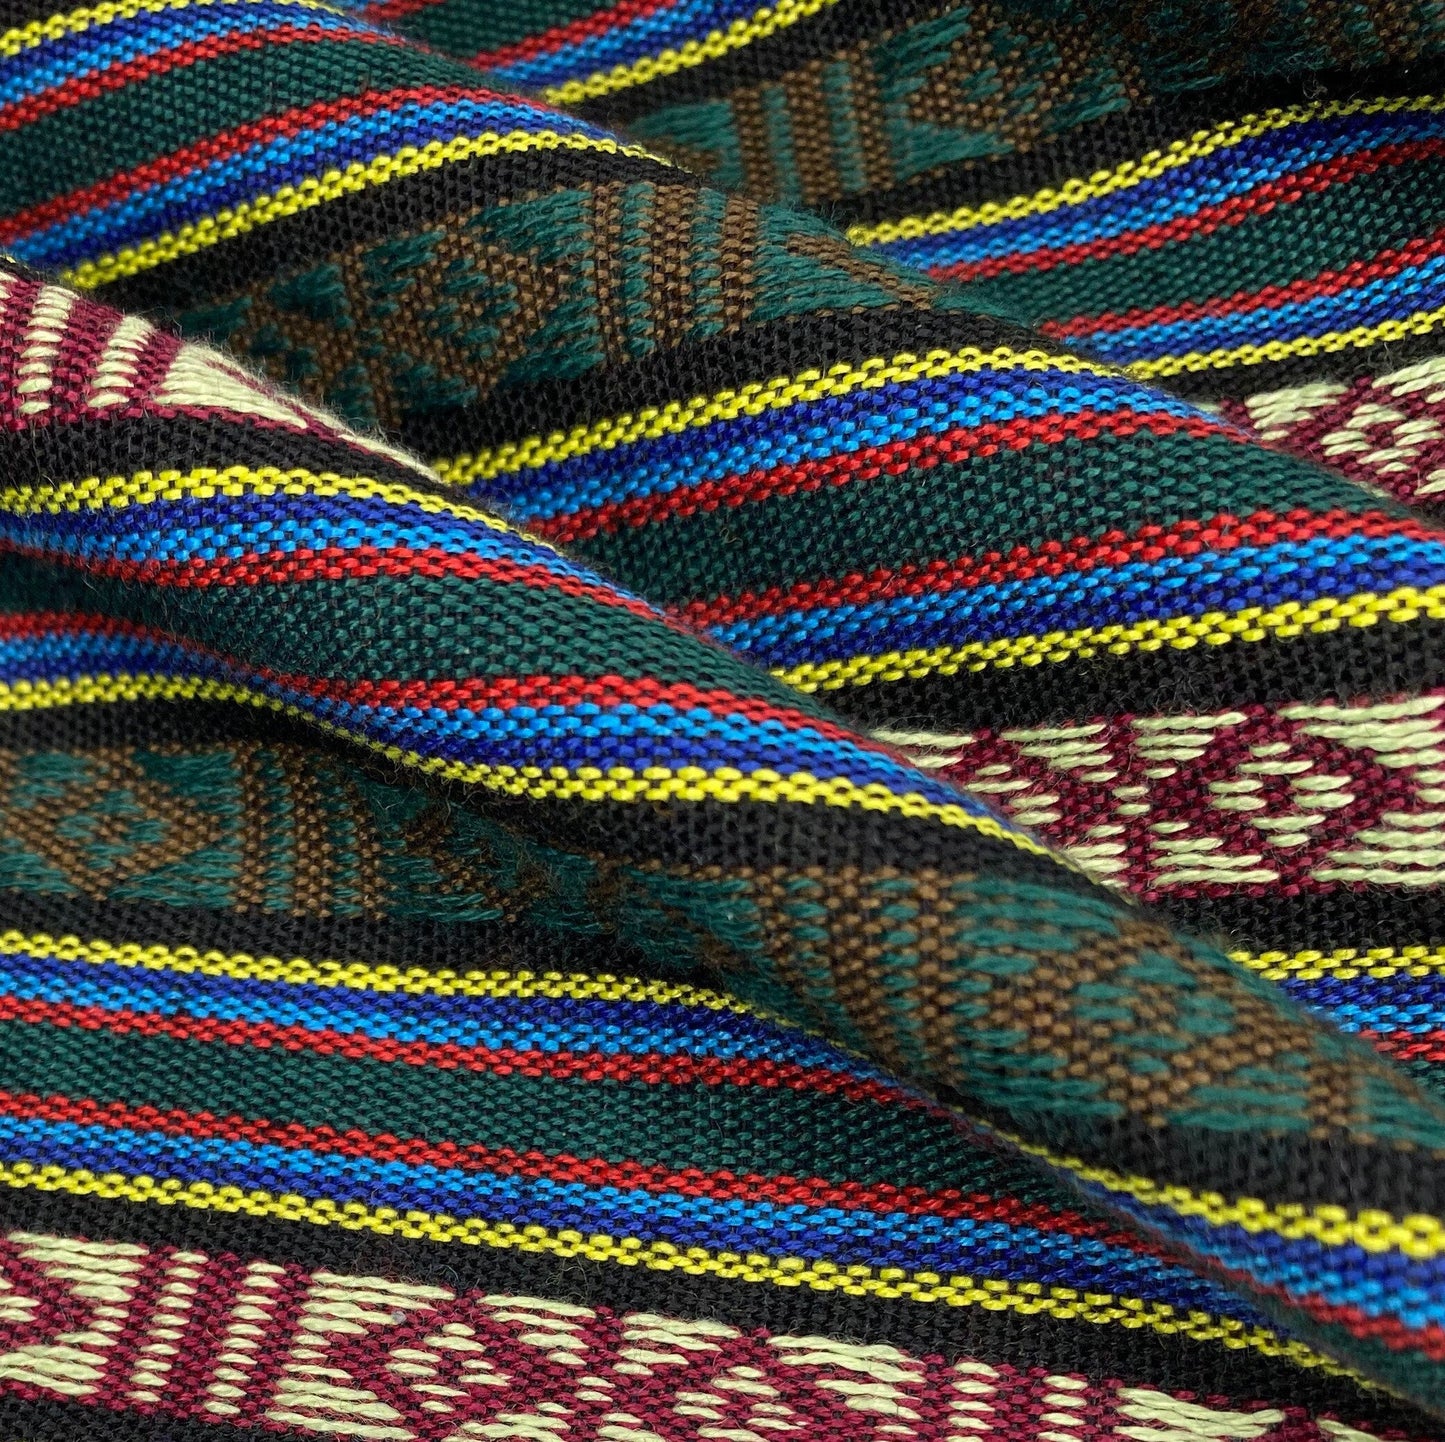 Woven Polyester - Striped Aztec - Green